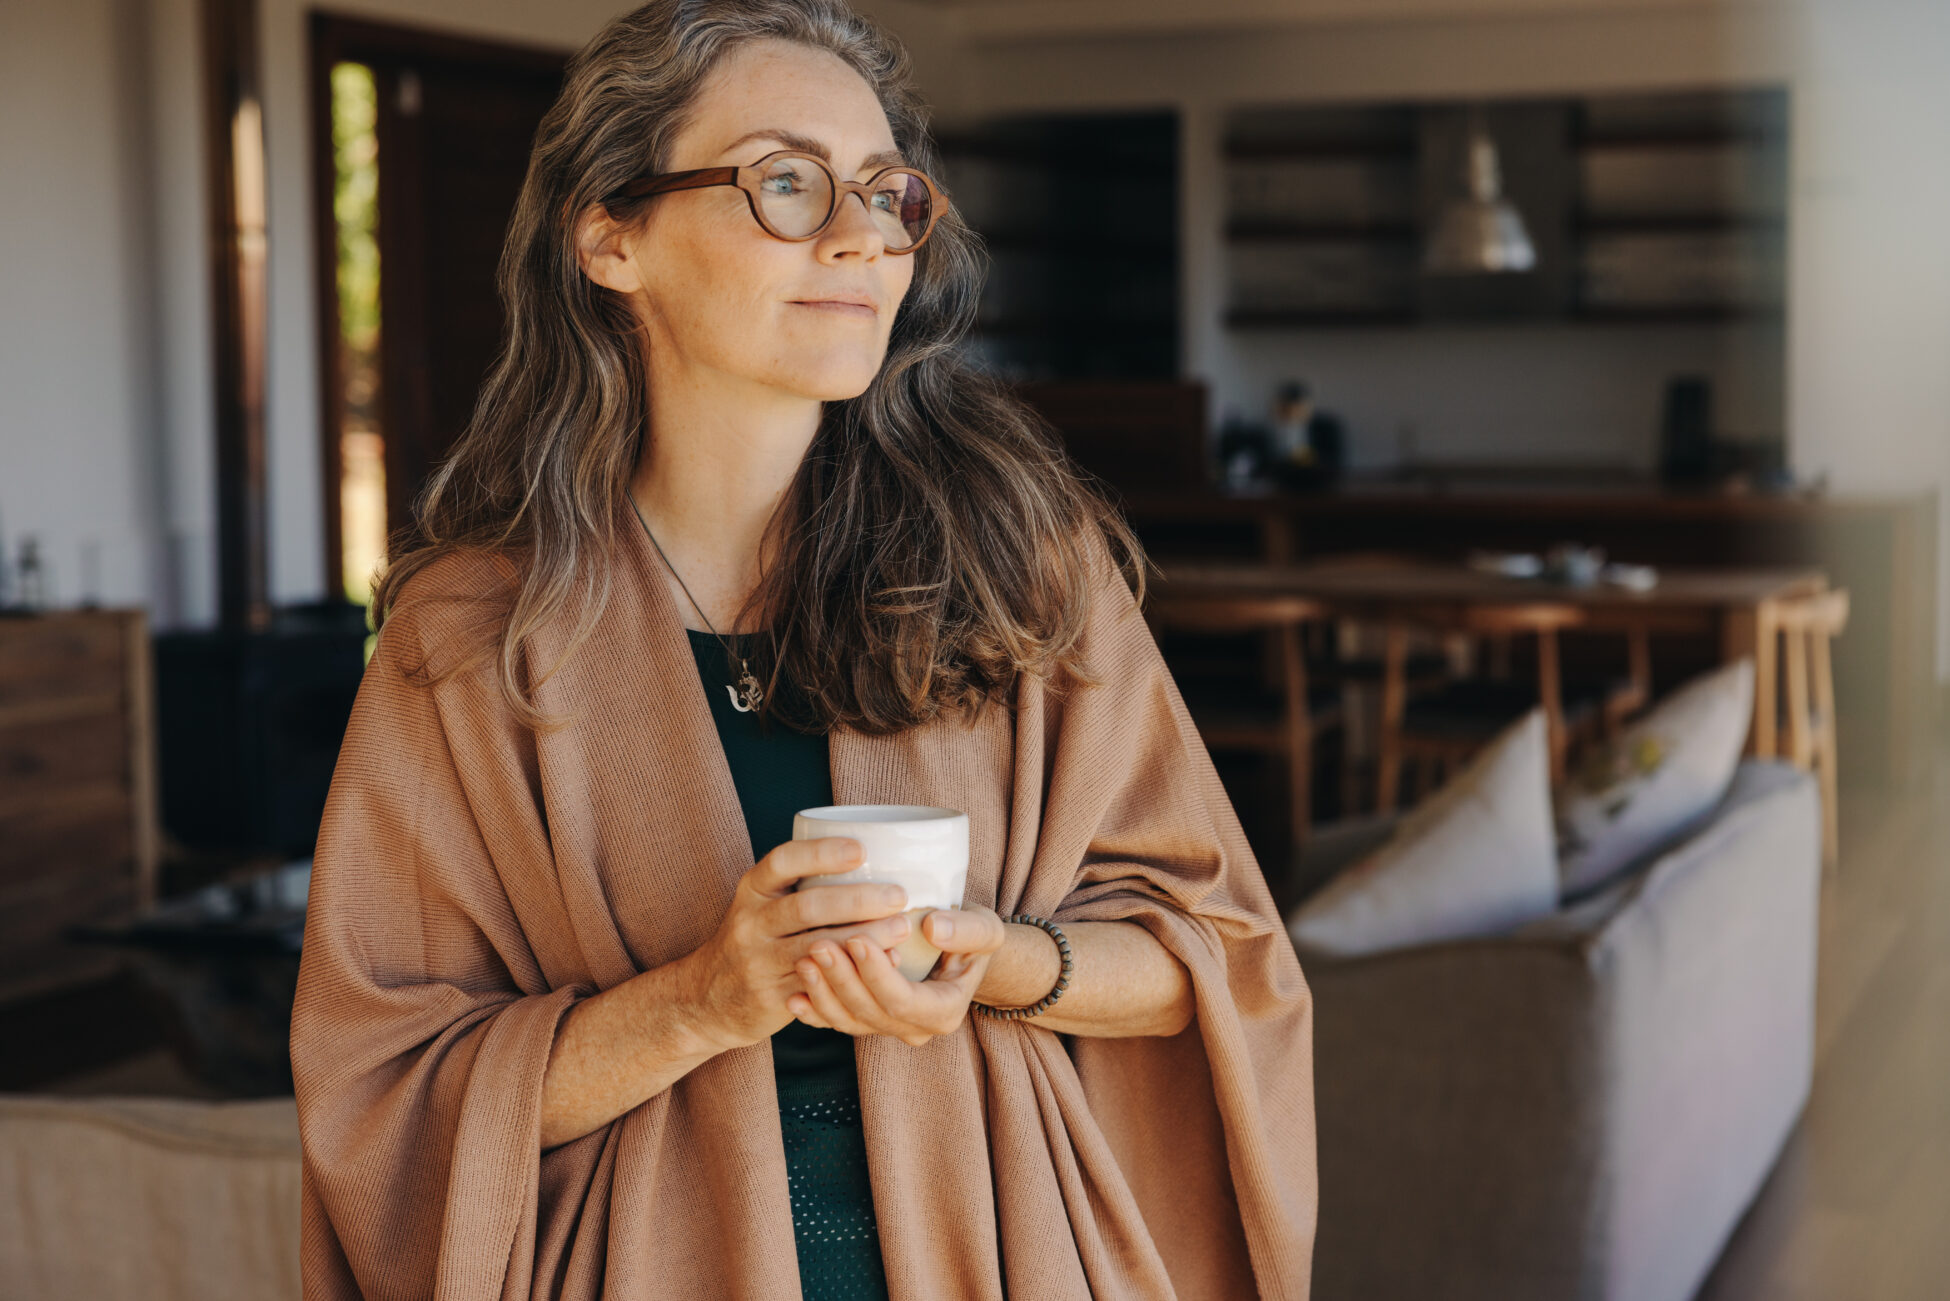 Middle aged woman enjoying morning coffee at home